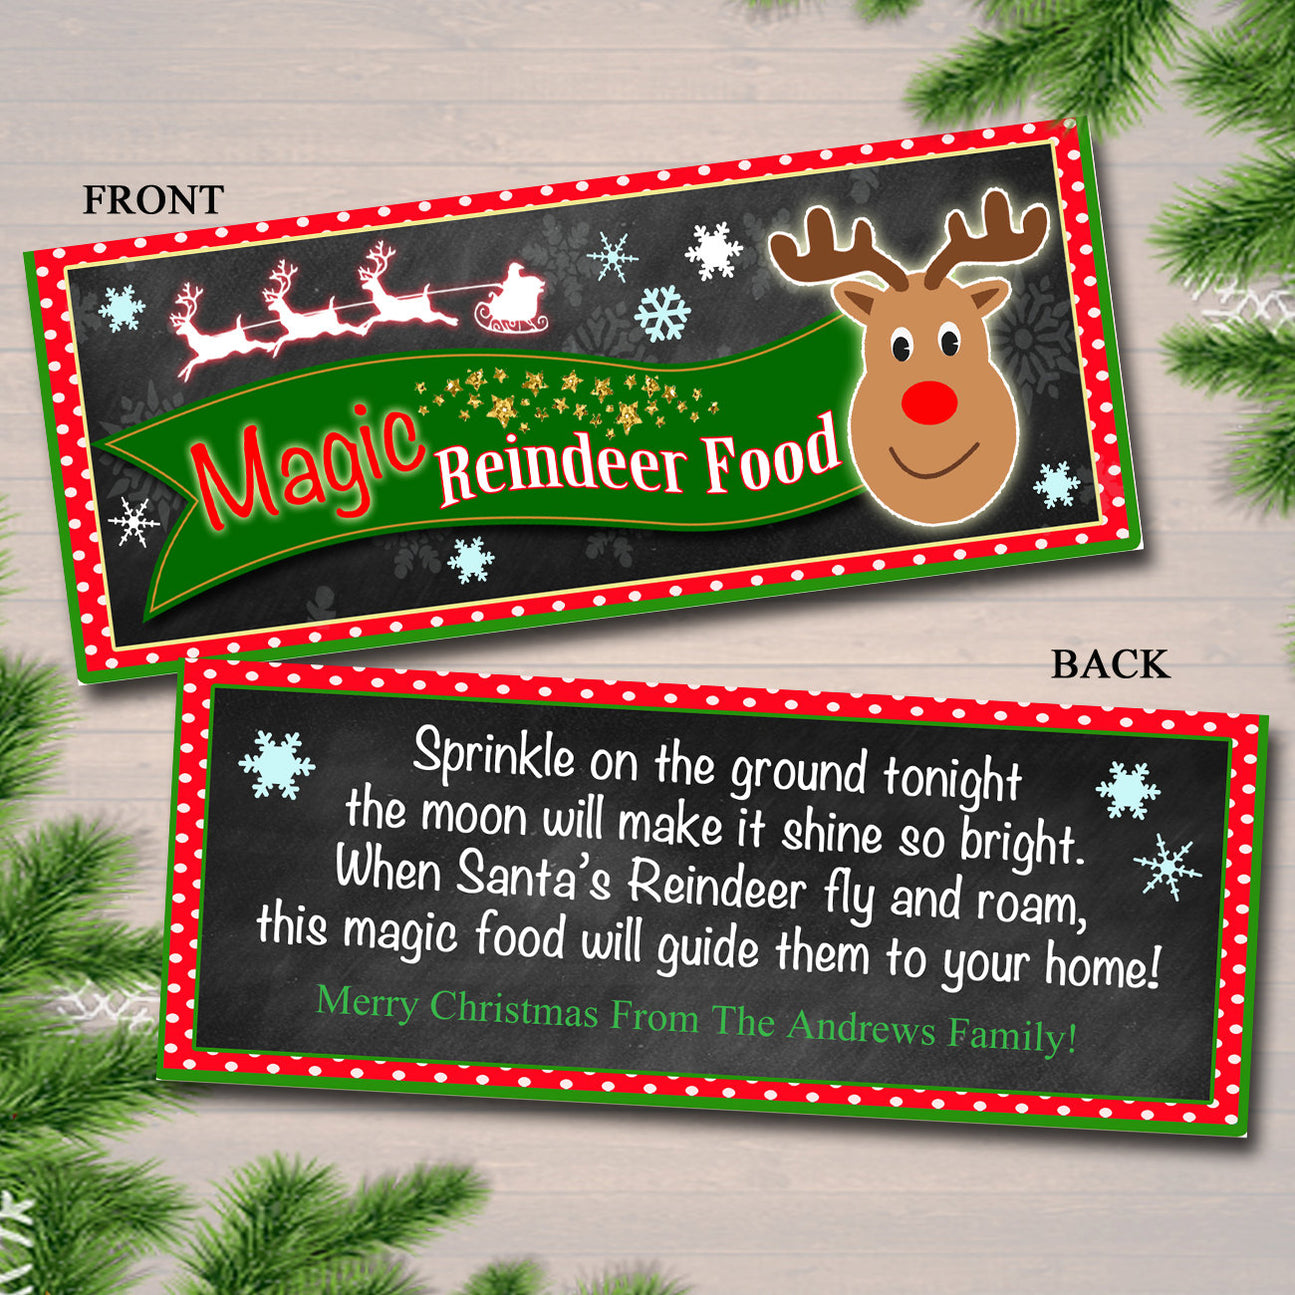 Magic Reindeer Food Bag Toppers | TidyLady Printables